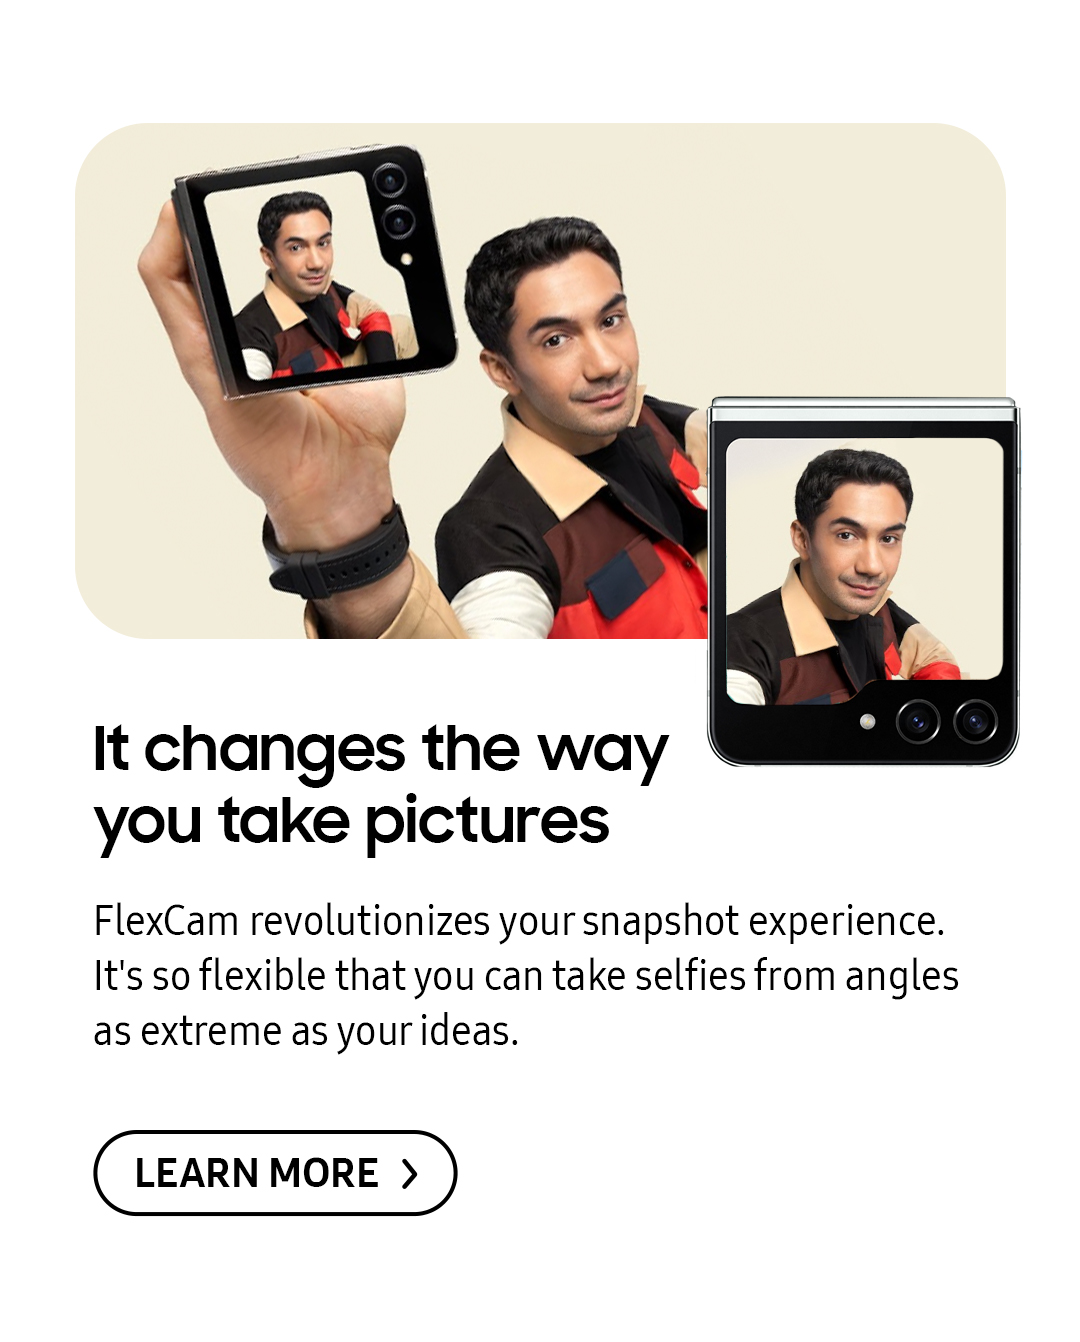 It changes the way you take pictures | FlexCam revolutionizes your snapshot experience. It's so flexible take selfies from angles as extreme as your ideas. Click here to learn more!